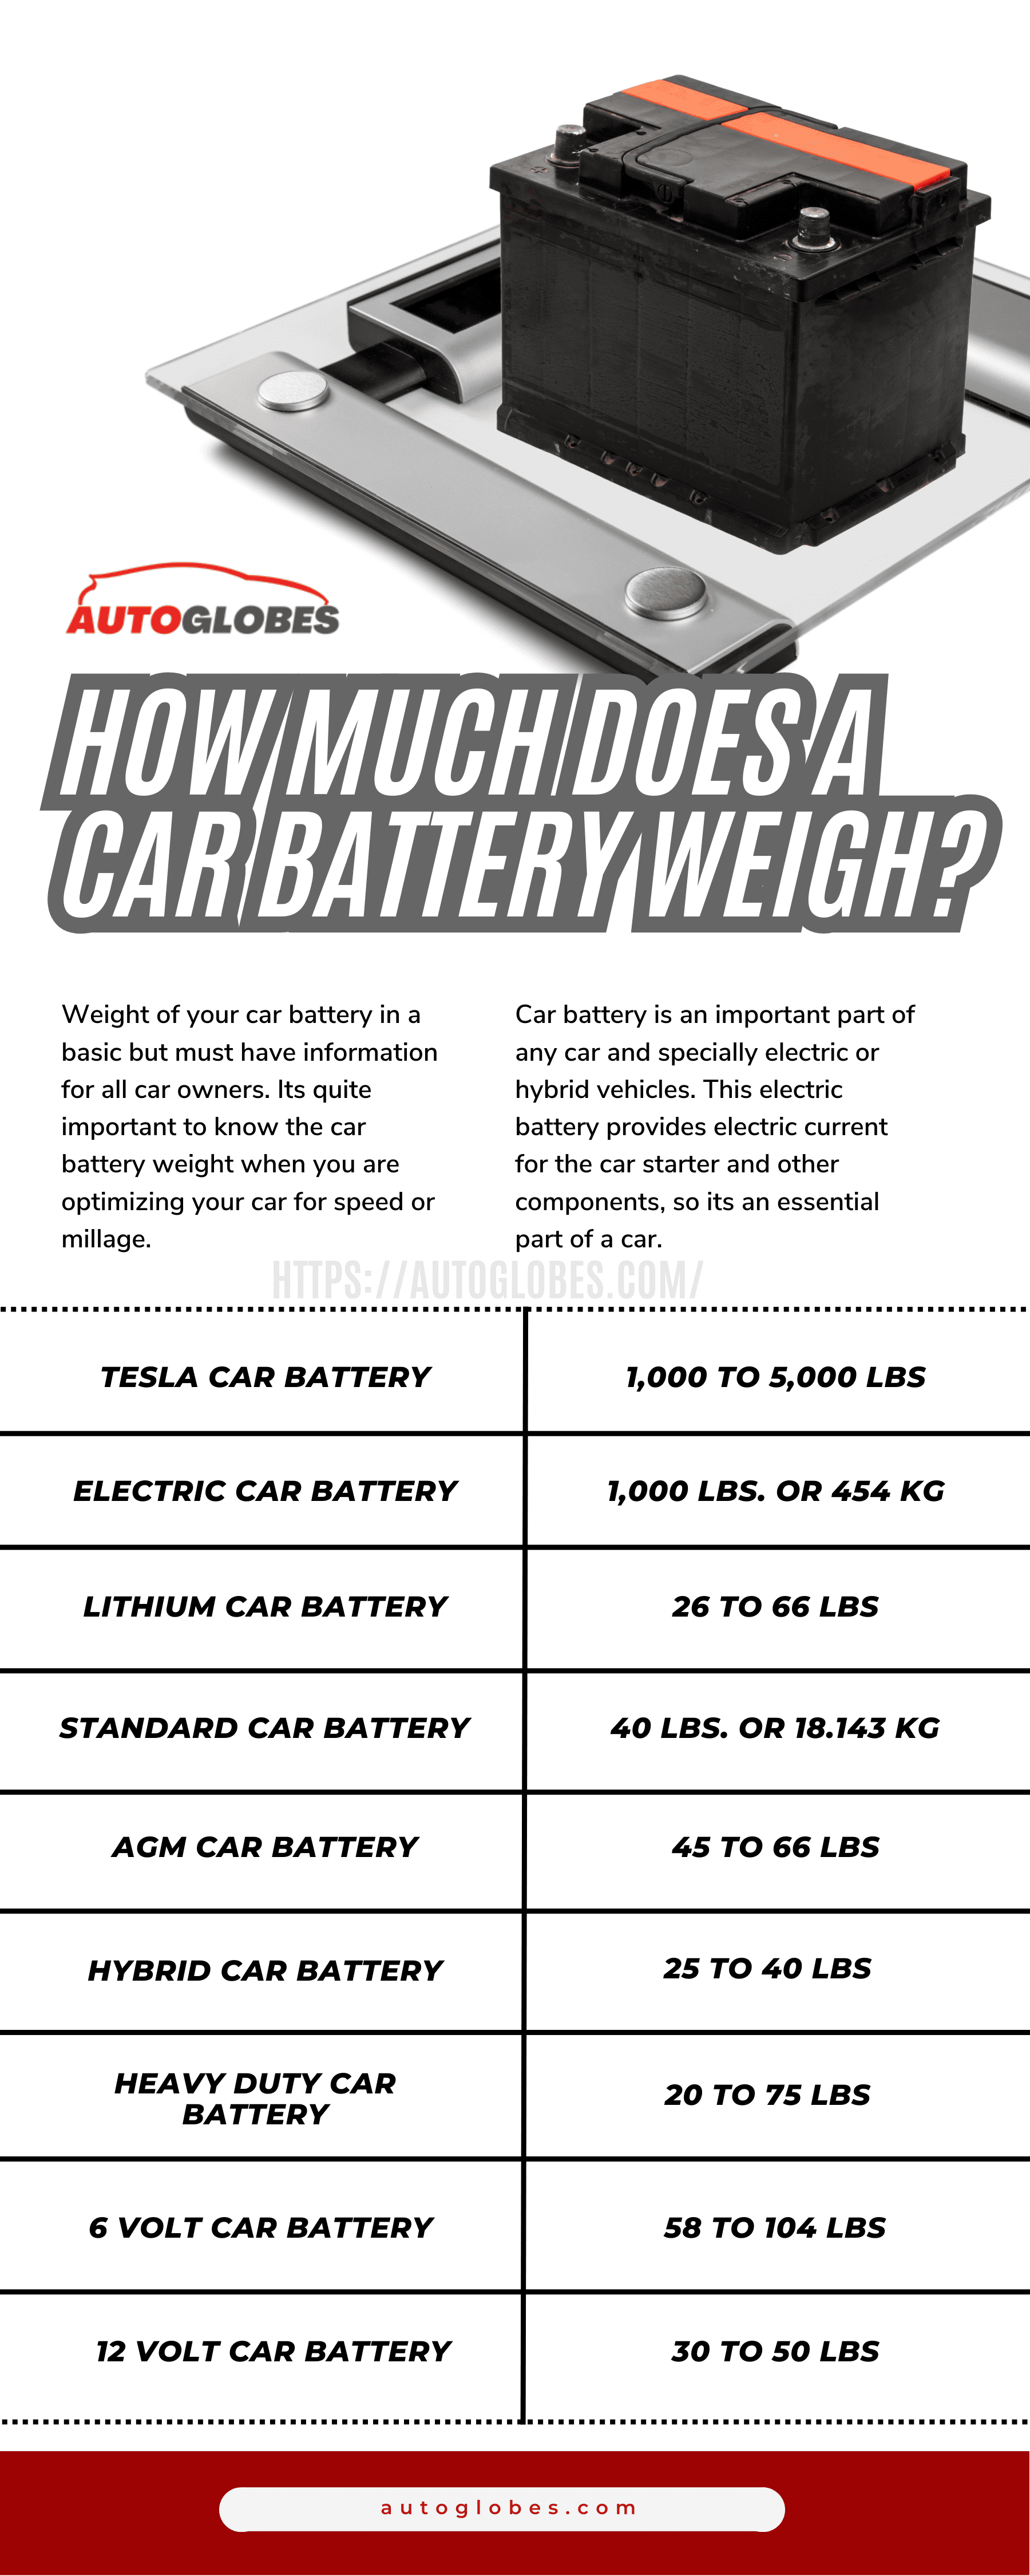 How Much Does A Car Battery Weigh Infographic